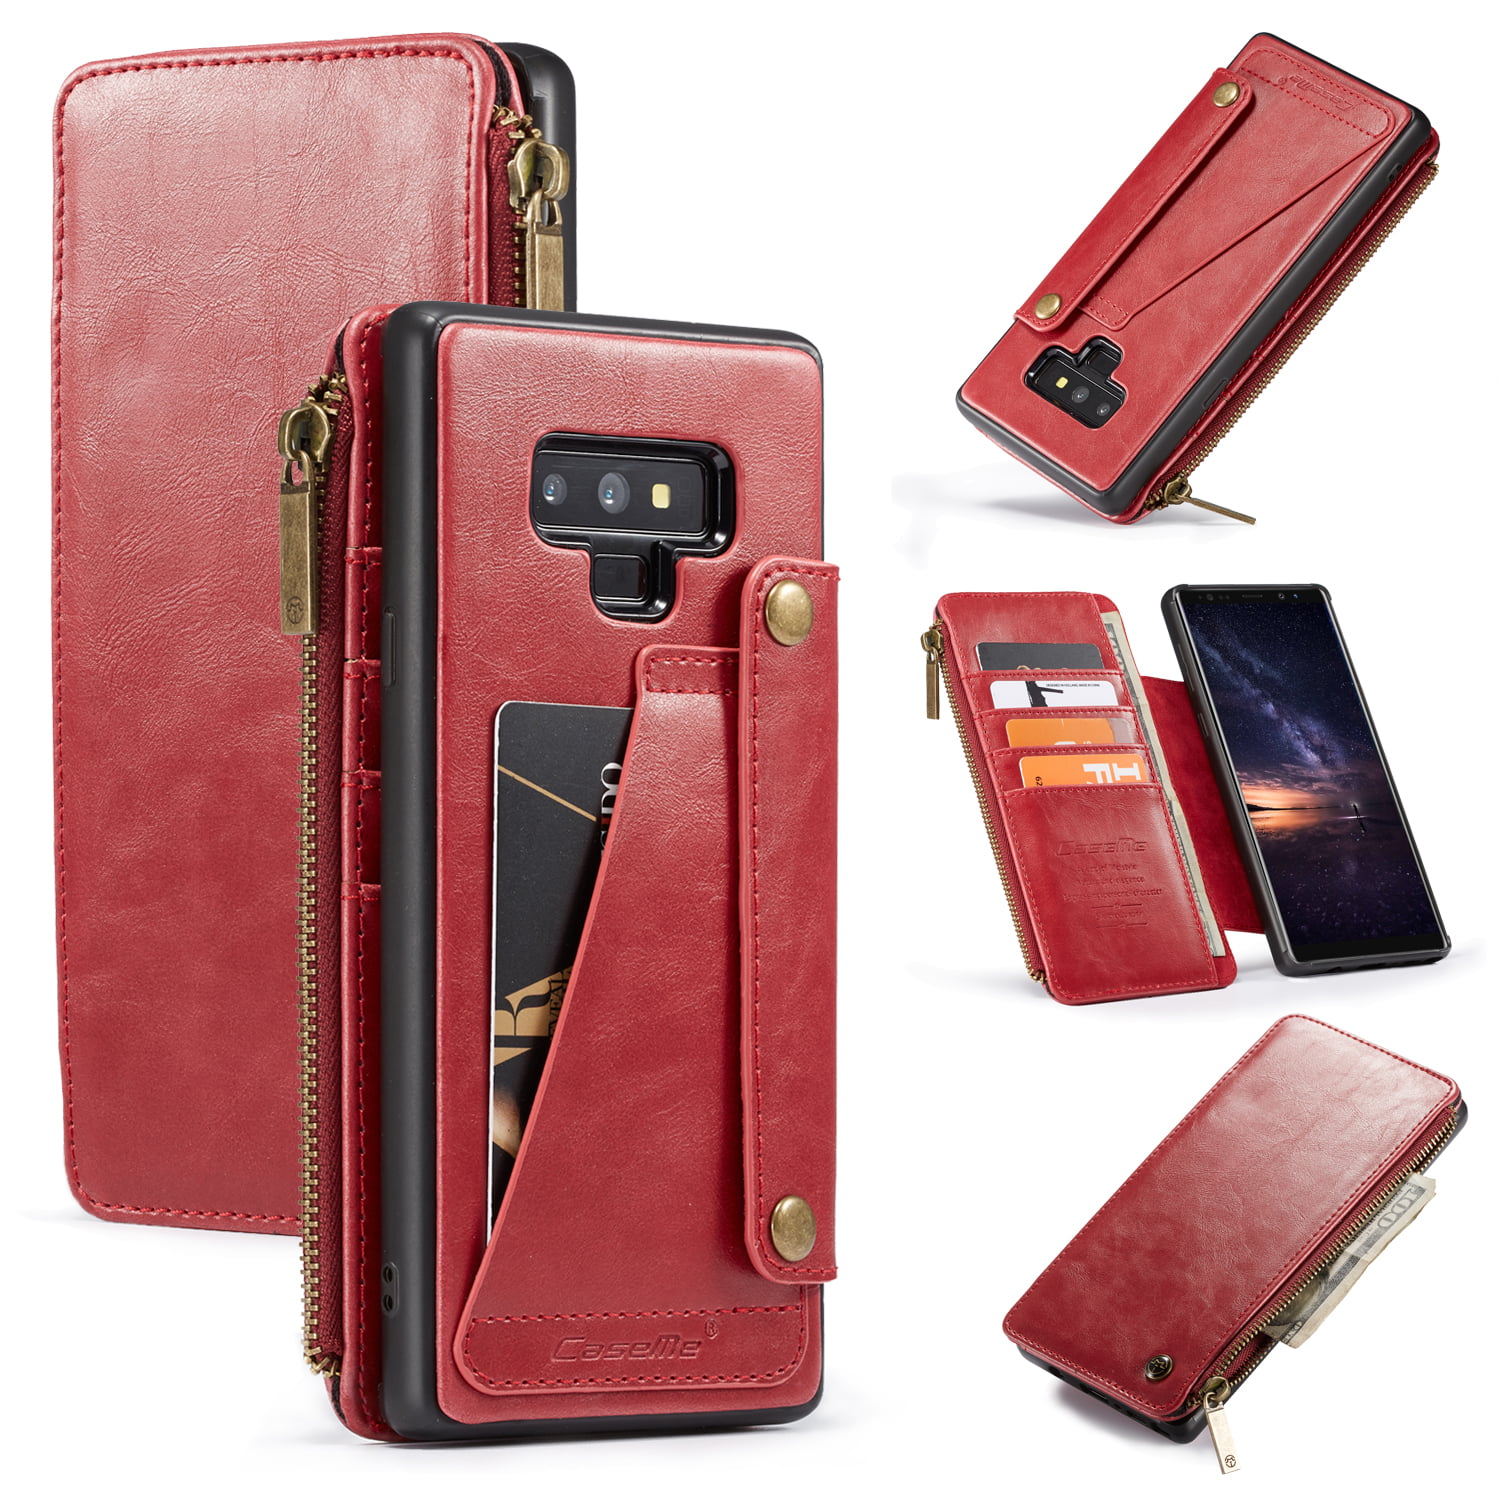 Galaxy Note 9 Case, Allytech Detachable Wallet Leather Zipper Cover with Credit Card Slots and ...